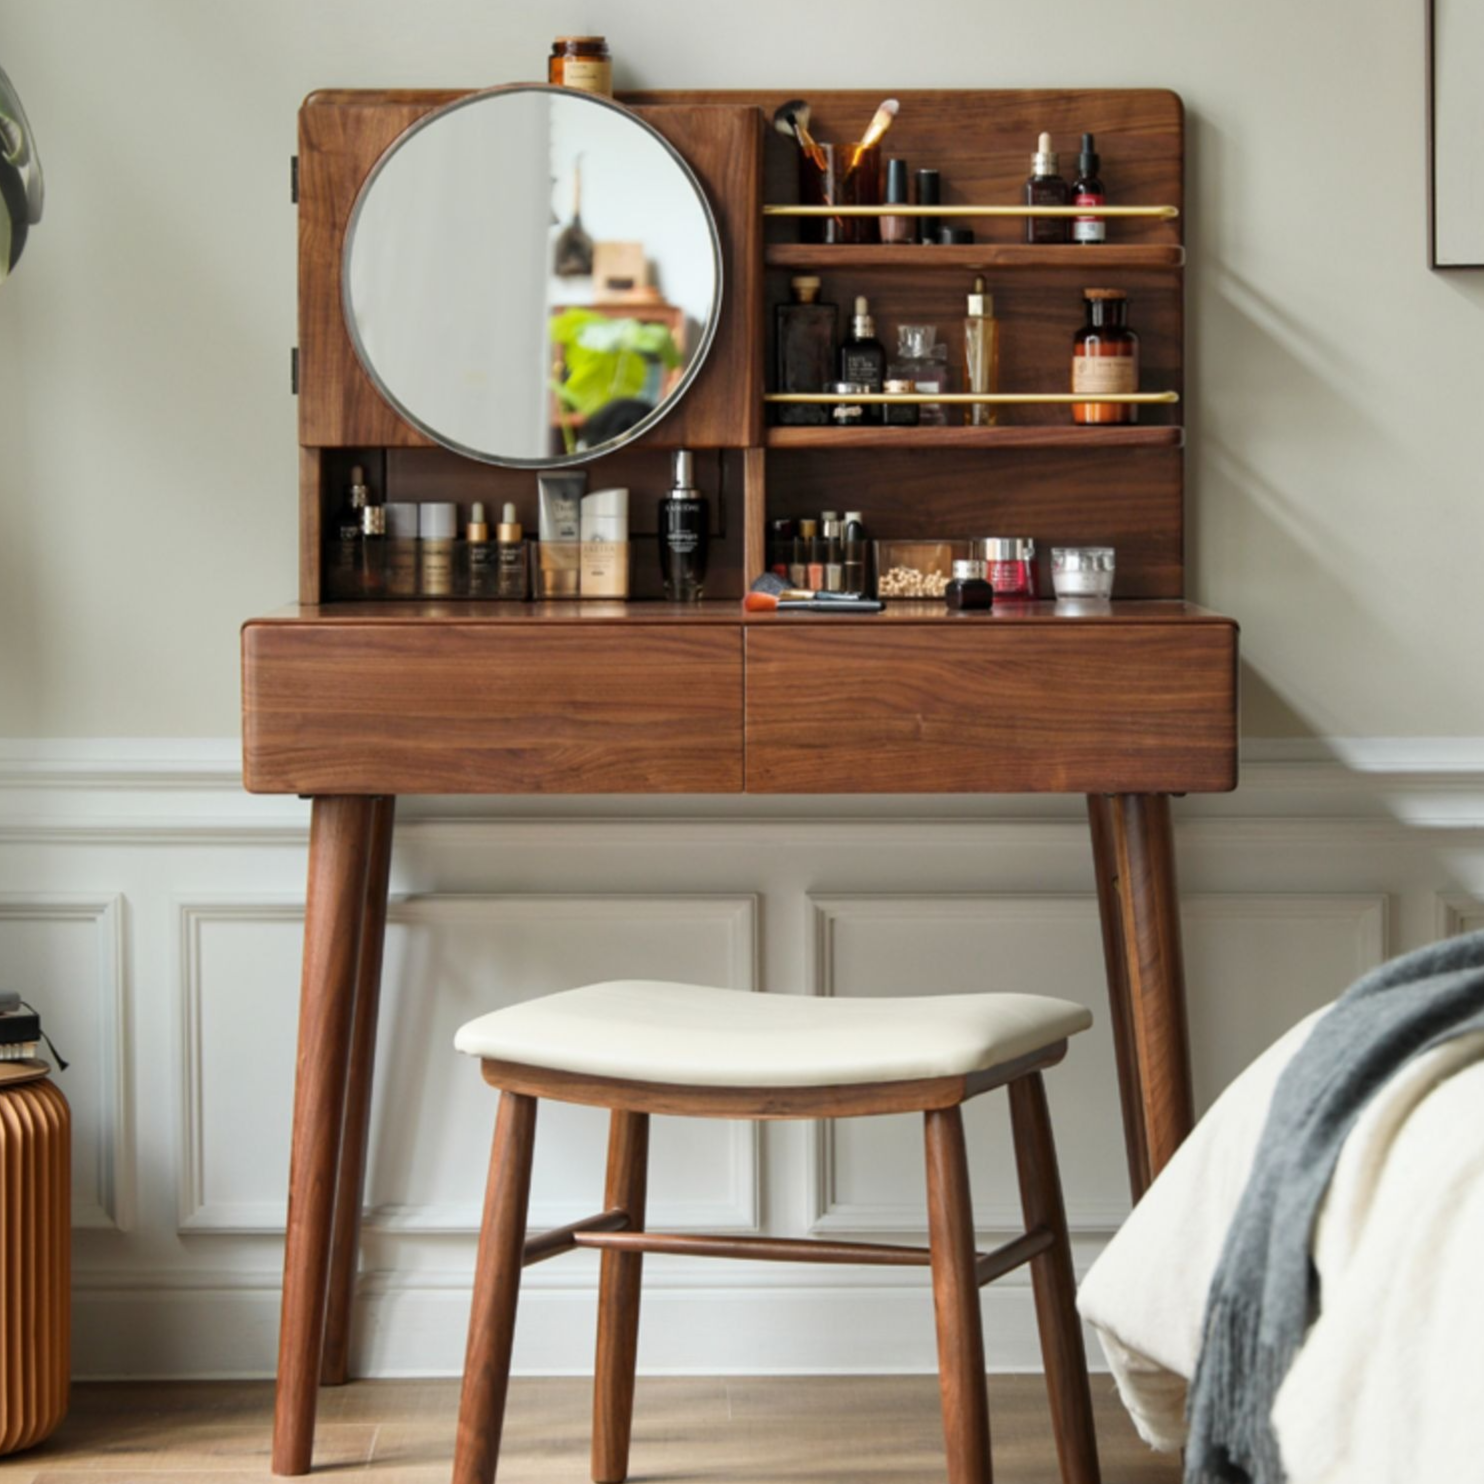 Black walnut solid wood makeup cabinet table with round mirror"